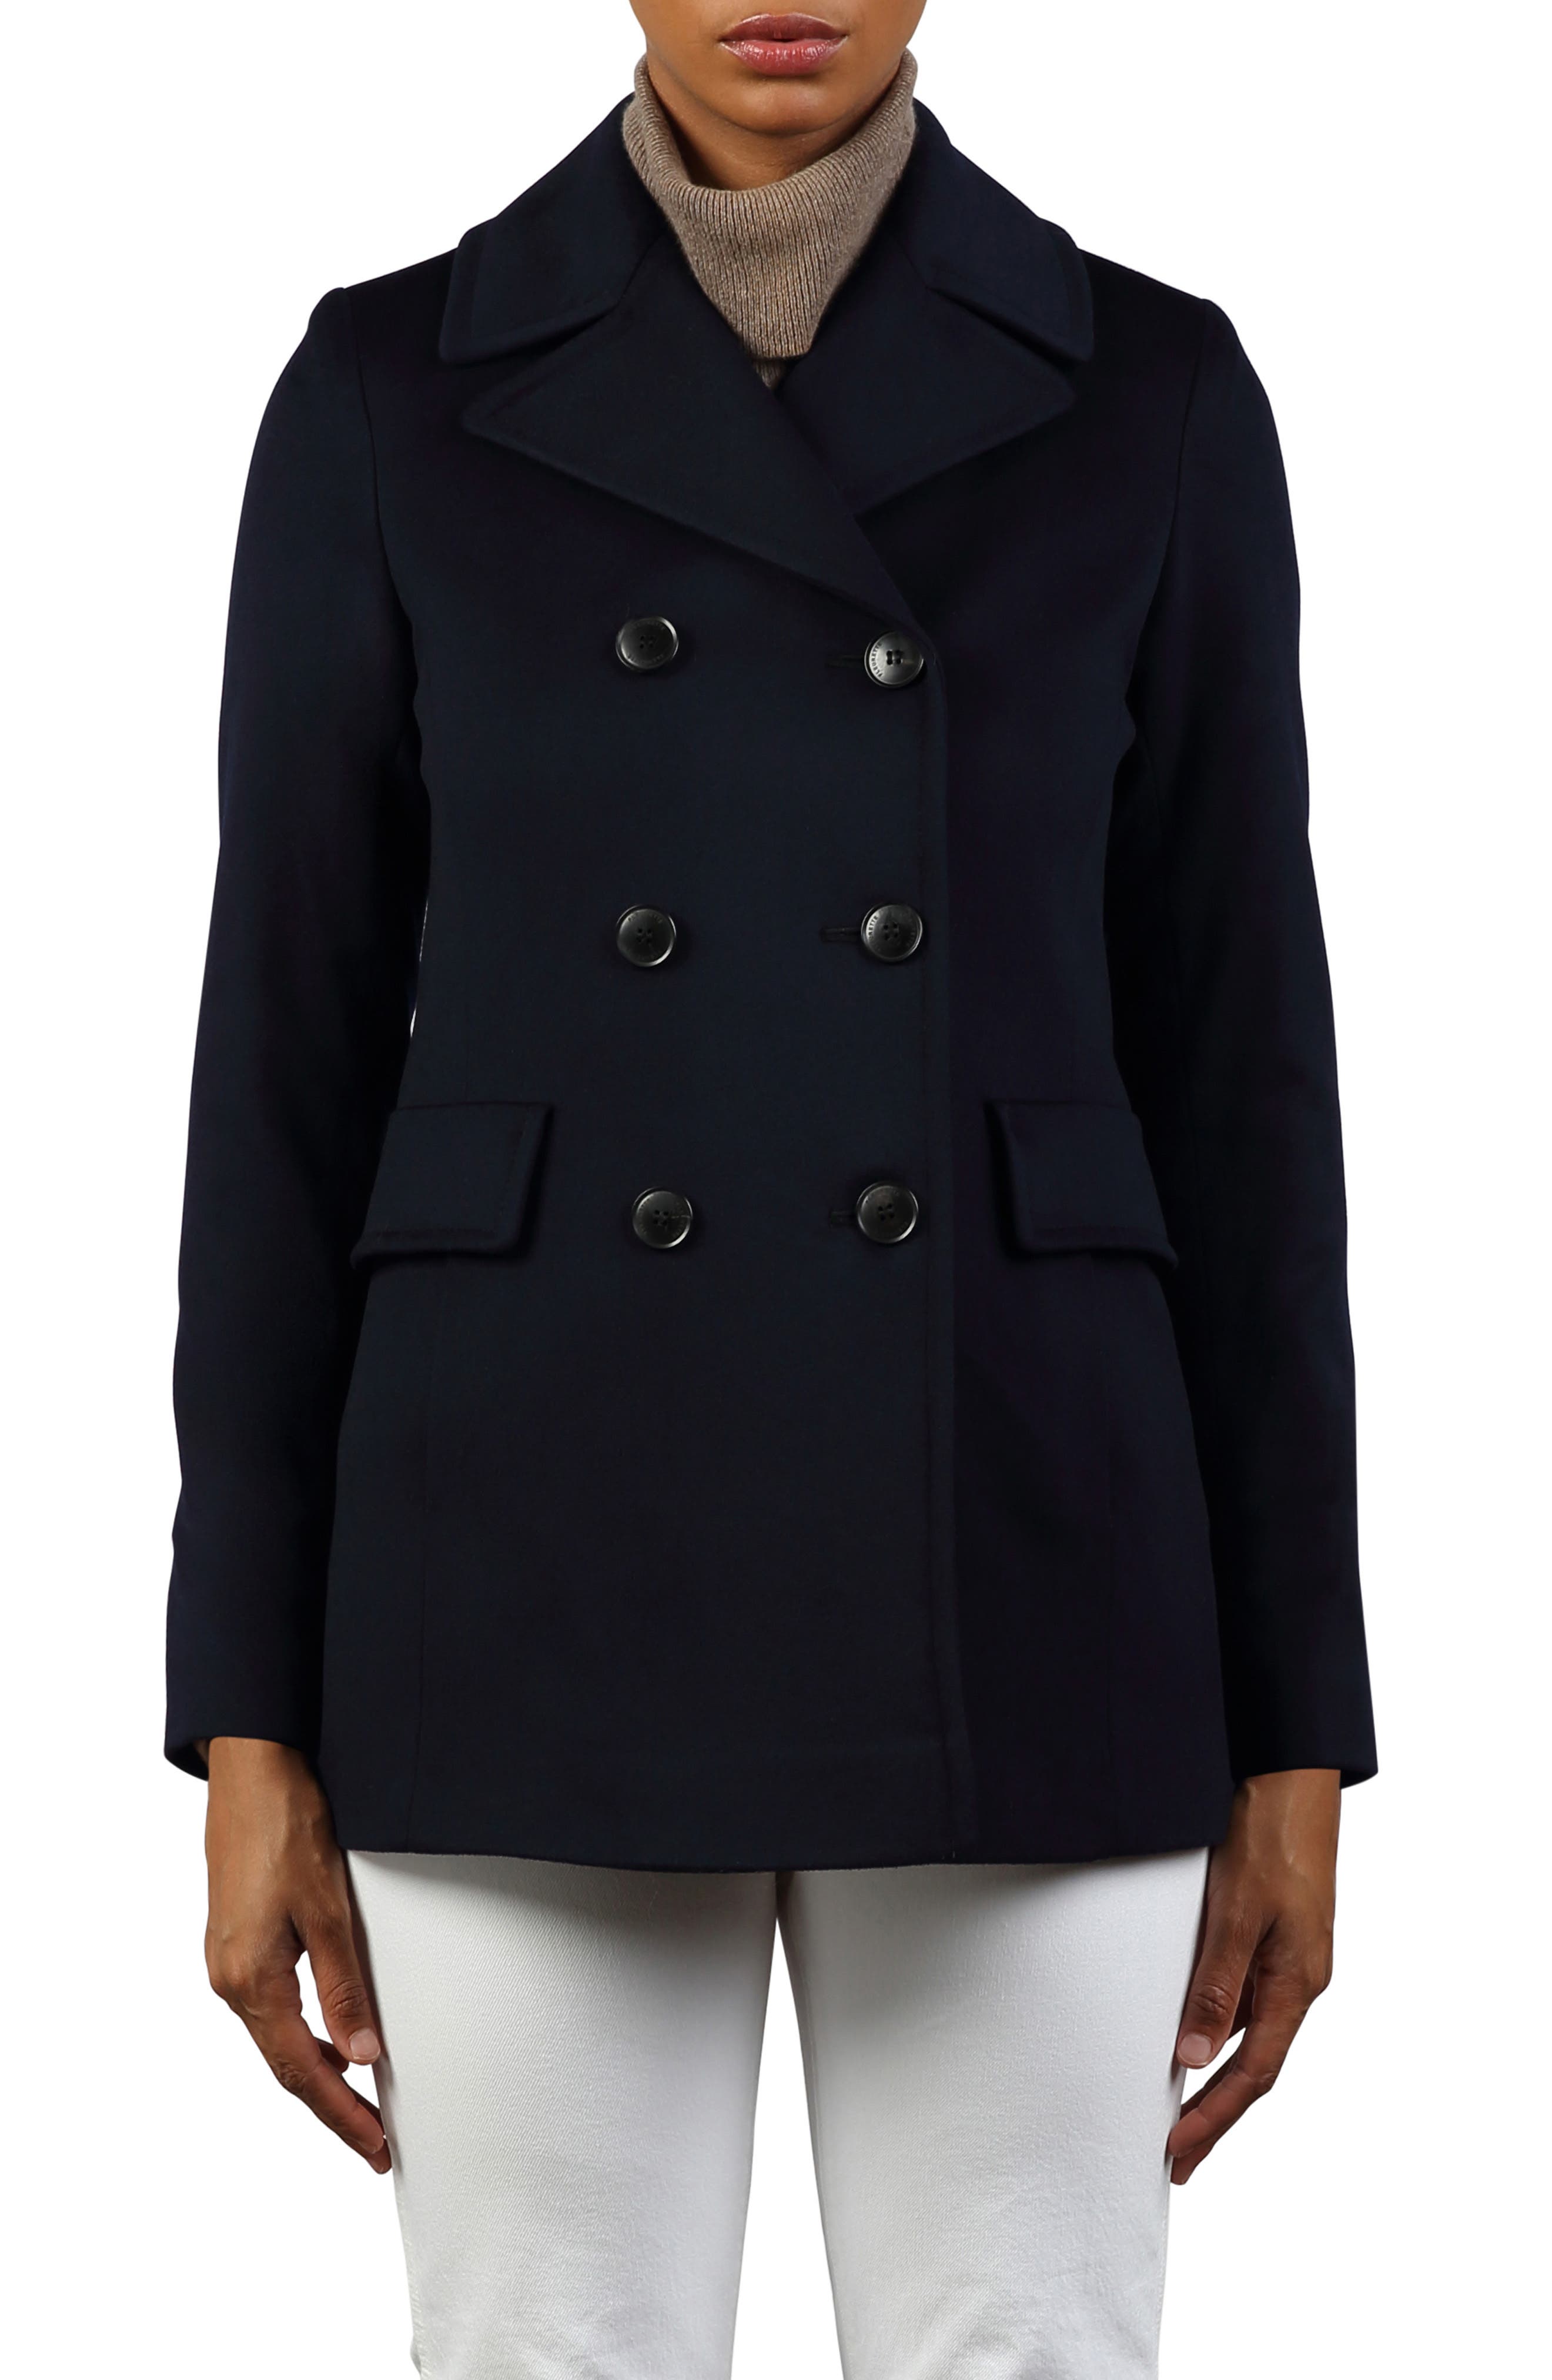 GUESS Factory Women's Dayna Double-Breasted Peacoat